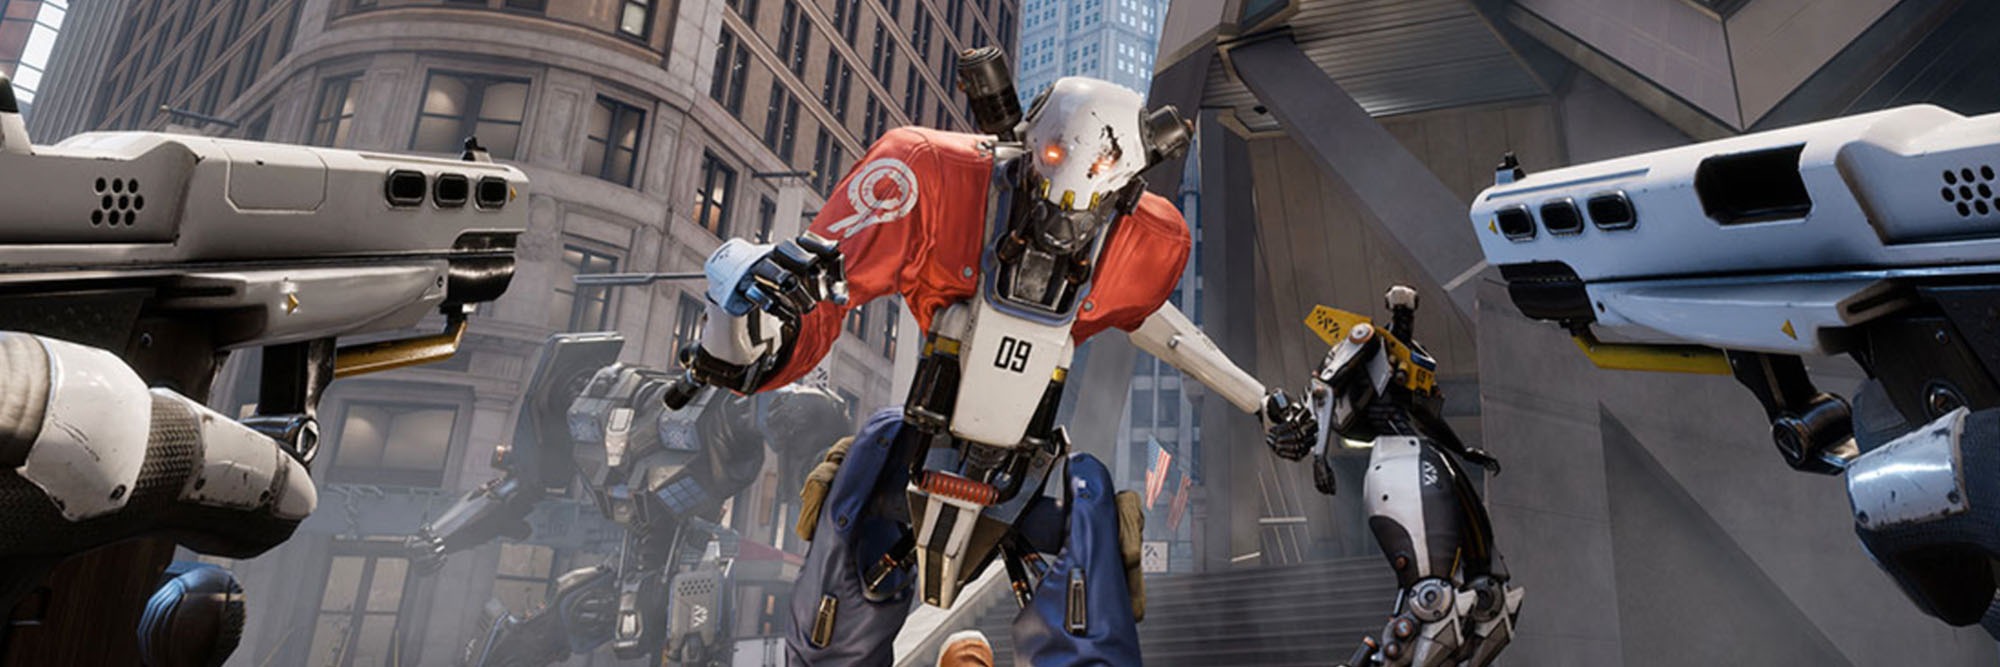 klasse Skur fornuft Why 'Robo Recall' Is The Best Reason To Own An Oculus VR Setup